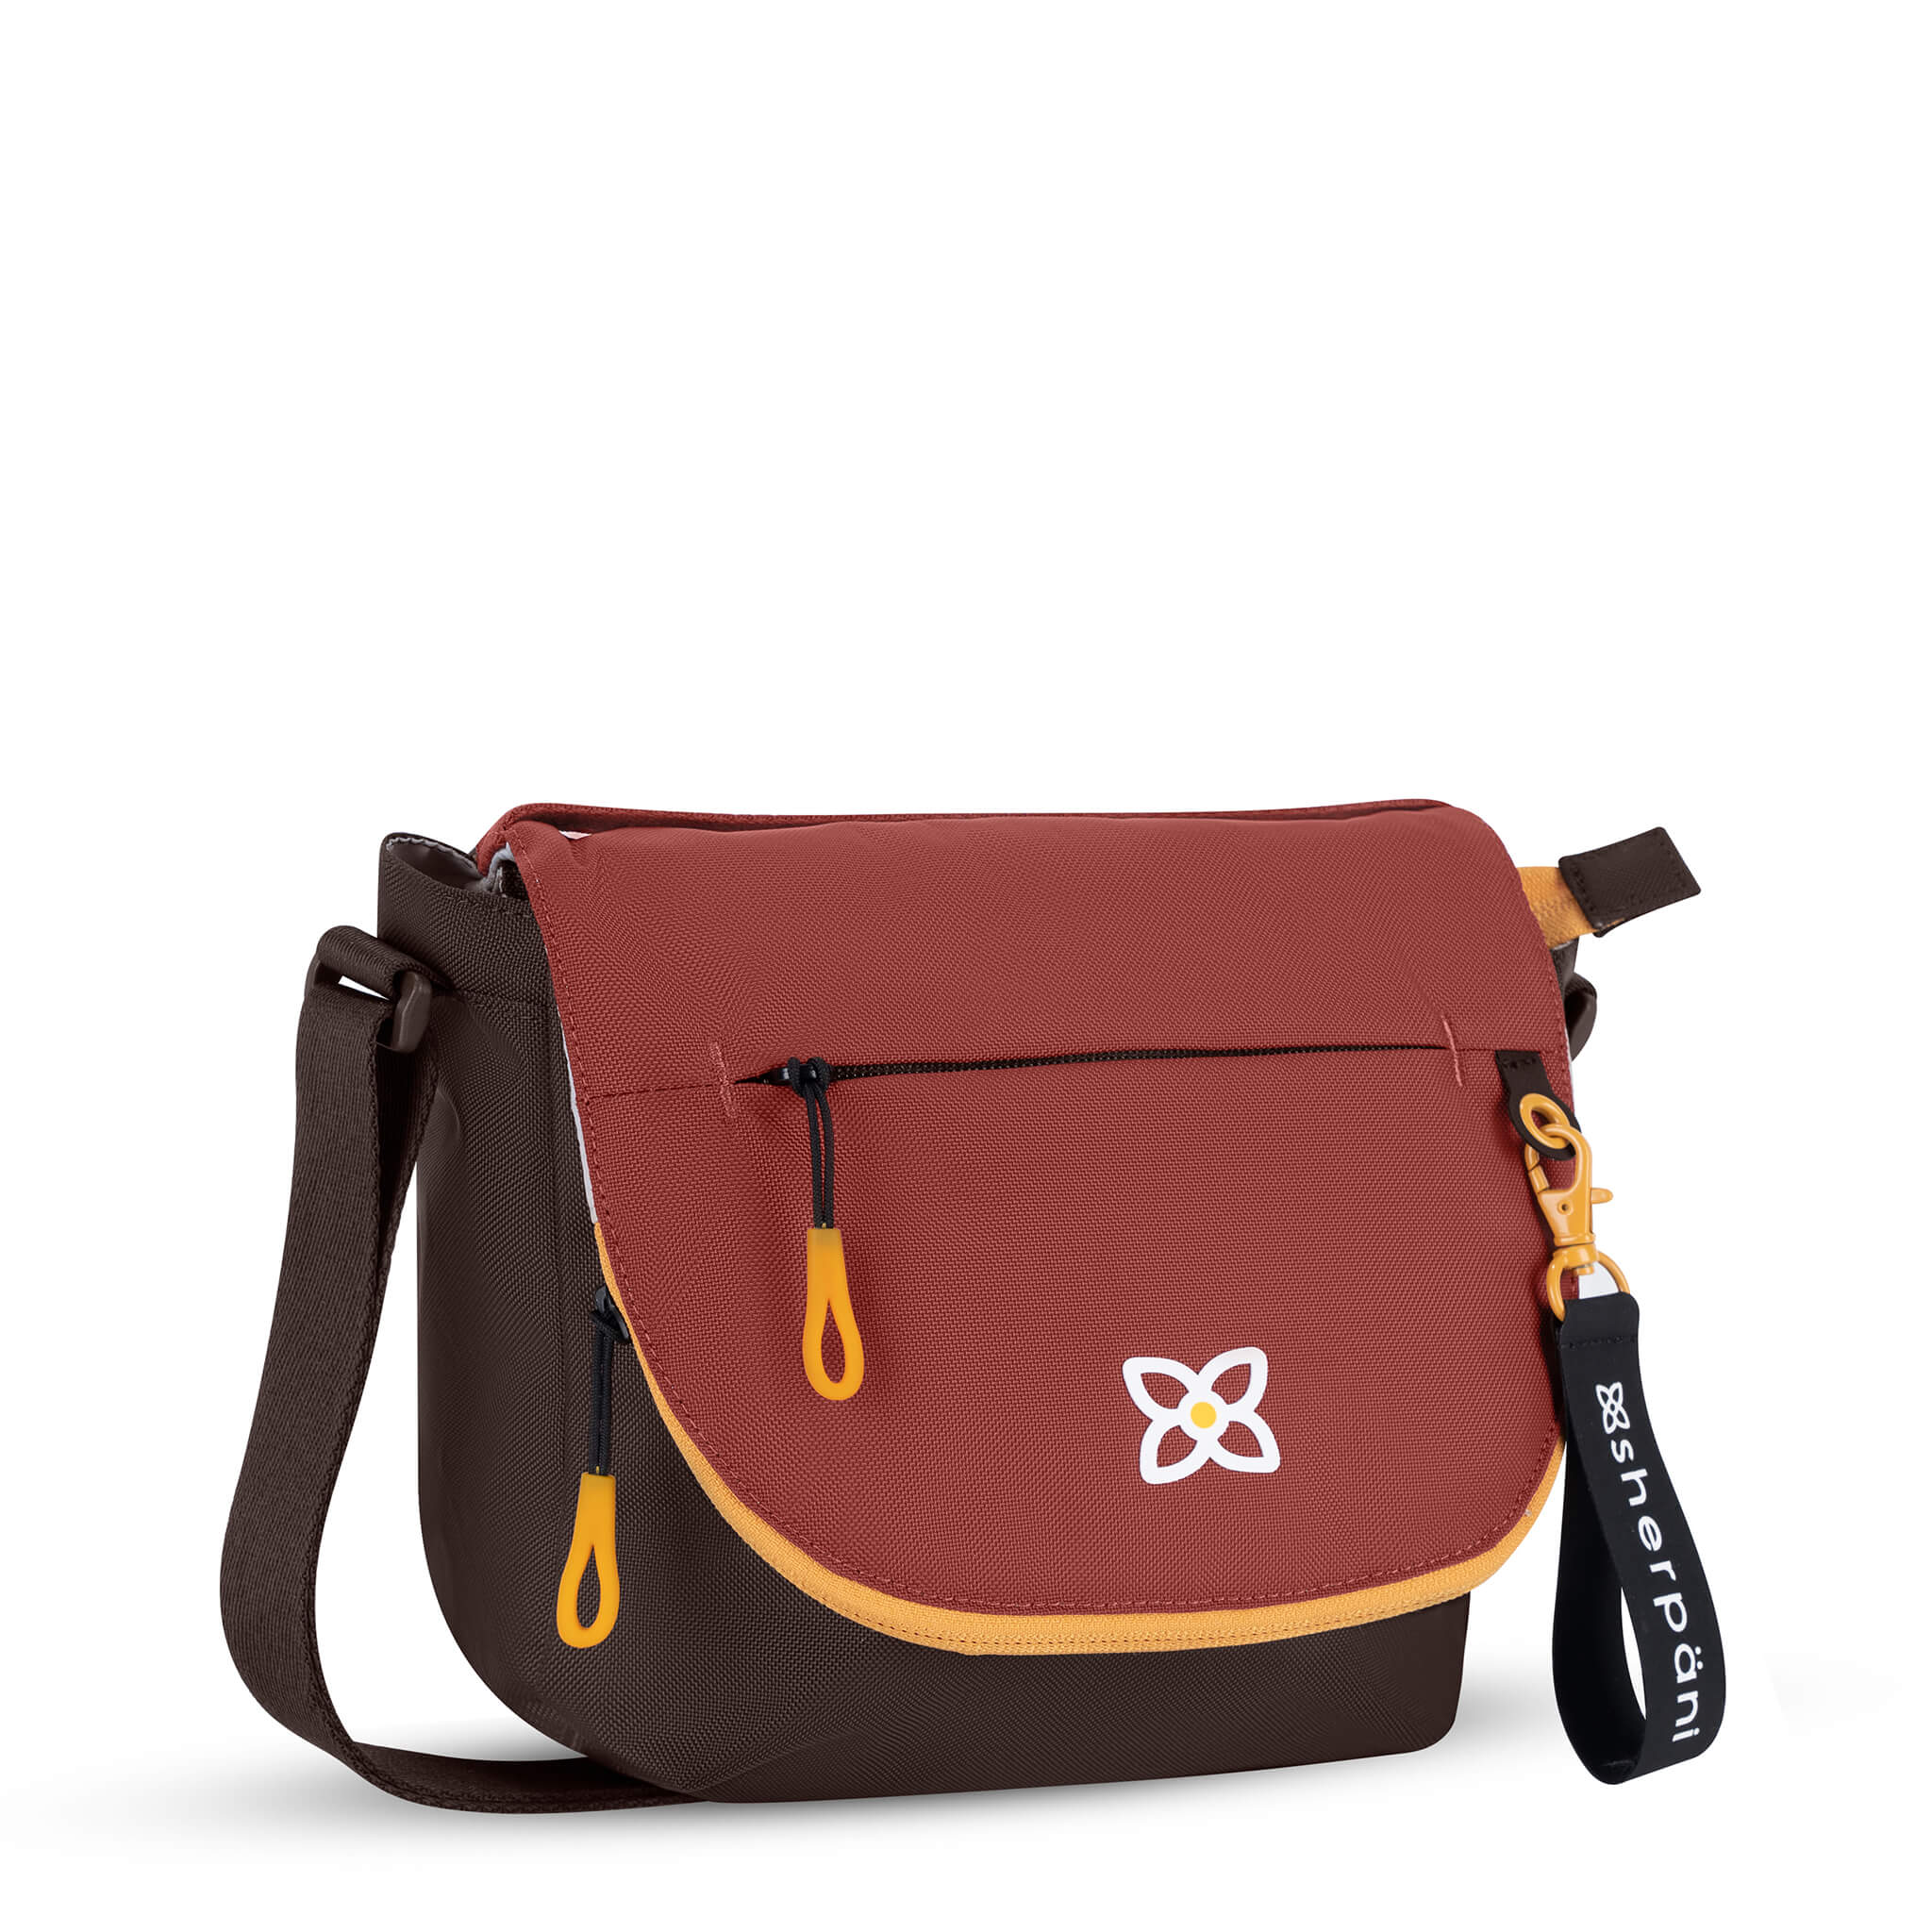 Angled front view of Sherpani messenger satchel bag, the Milli in Cider. Milli features include an adjustable crossbody strap, front zipper pocket, brimmed zipper pocket, detachable keychain, magnetic closure, RFID security and multiple internal pockets for organization. The Cider color is two-toned in burgundy and dark brown with yellow accents. #color_cider